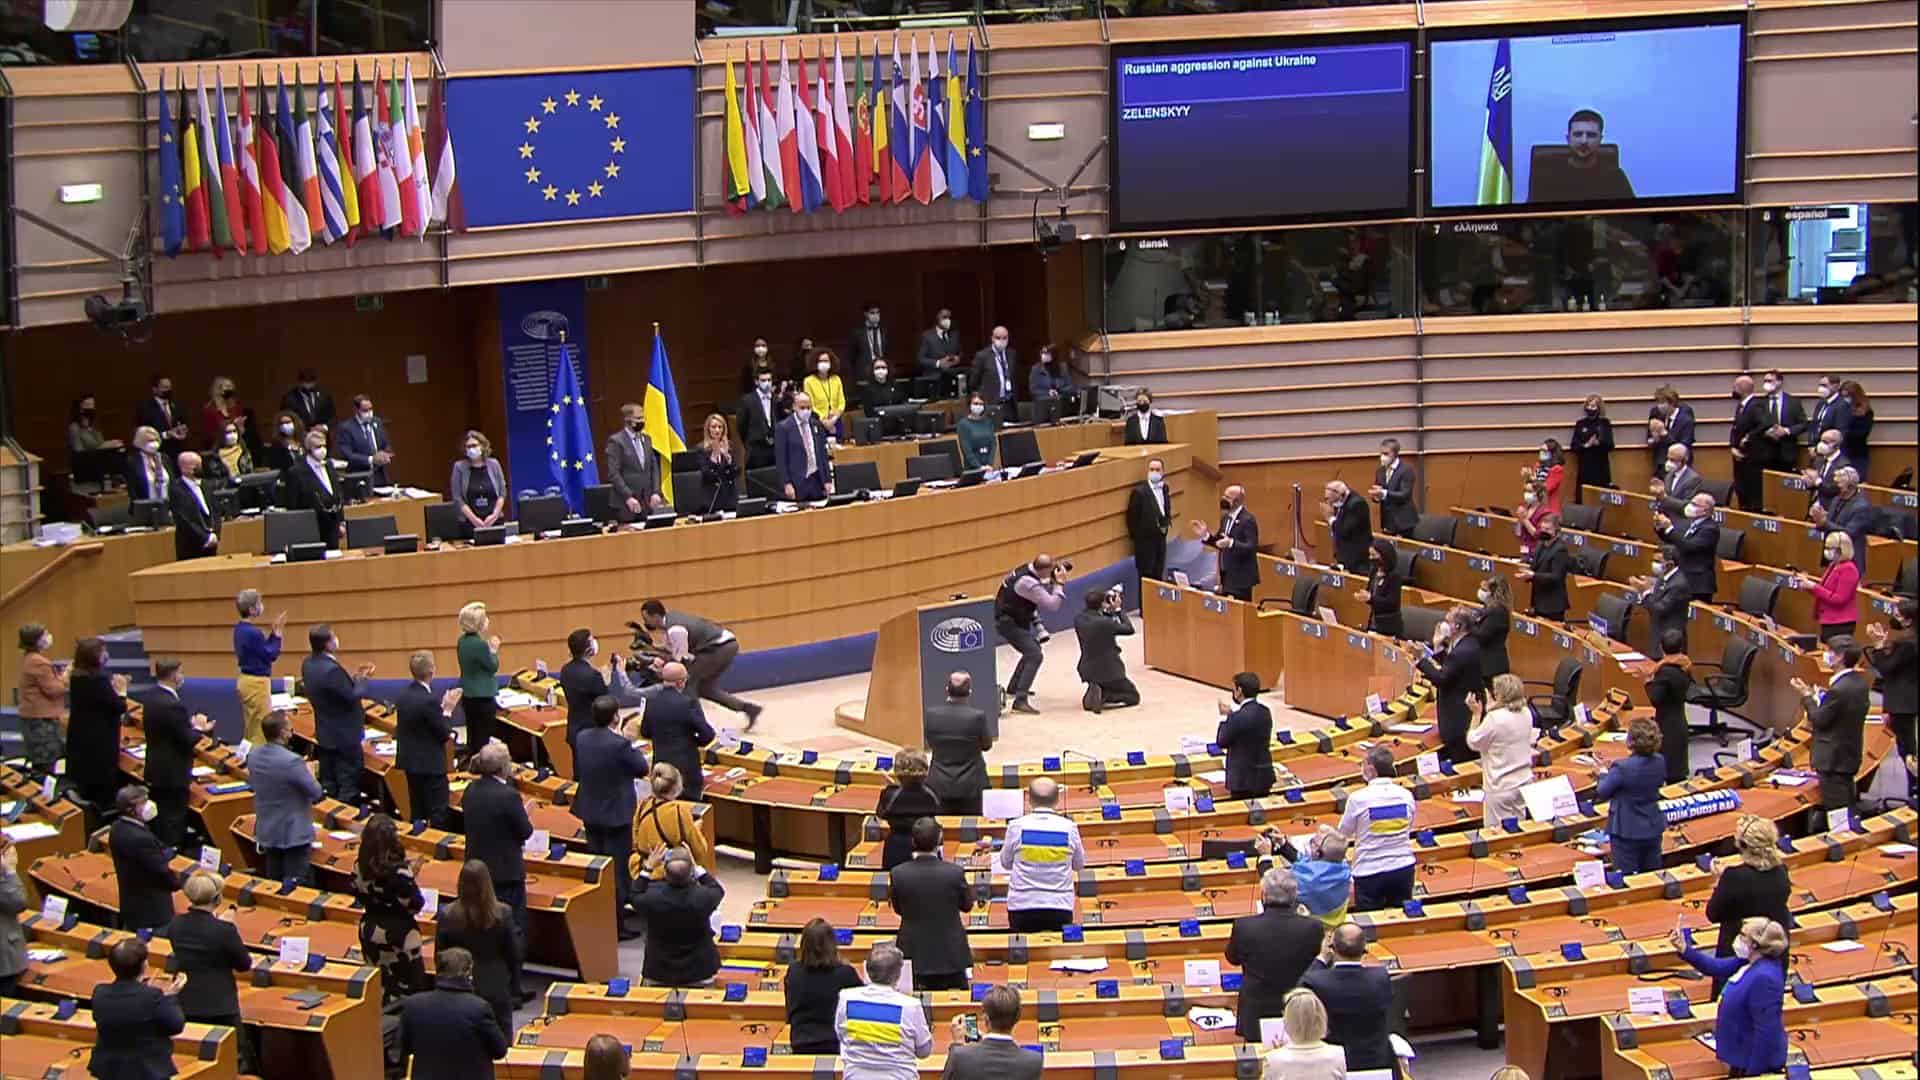 ‘Life will conquer death’: Zelensky given emotional standing ovation by EU Parliament